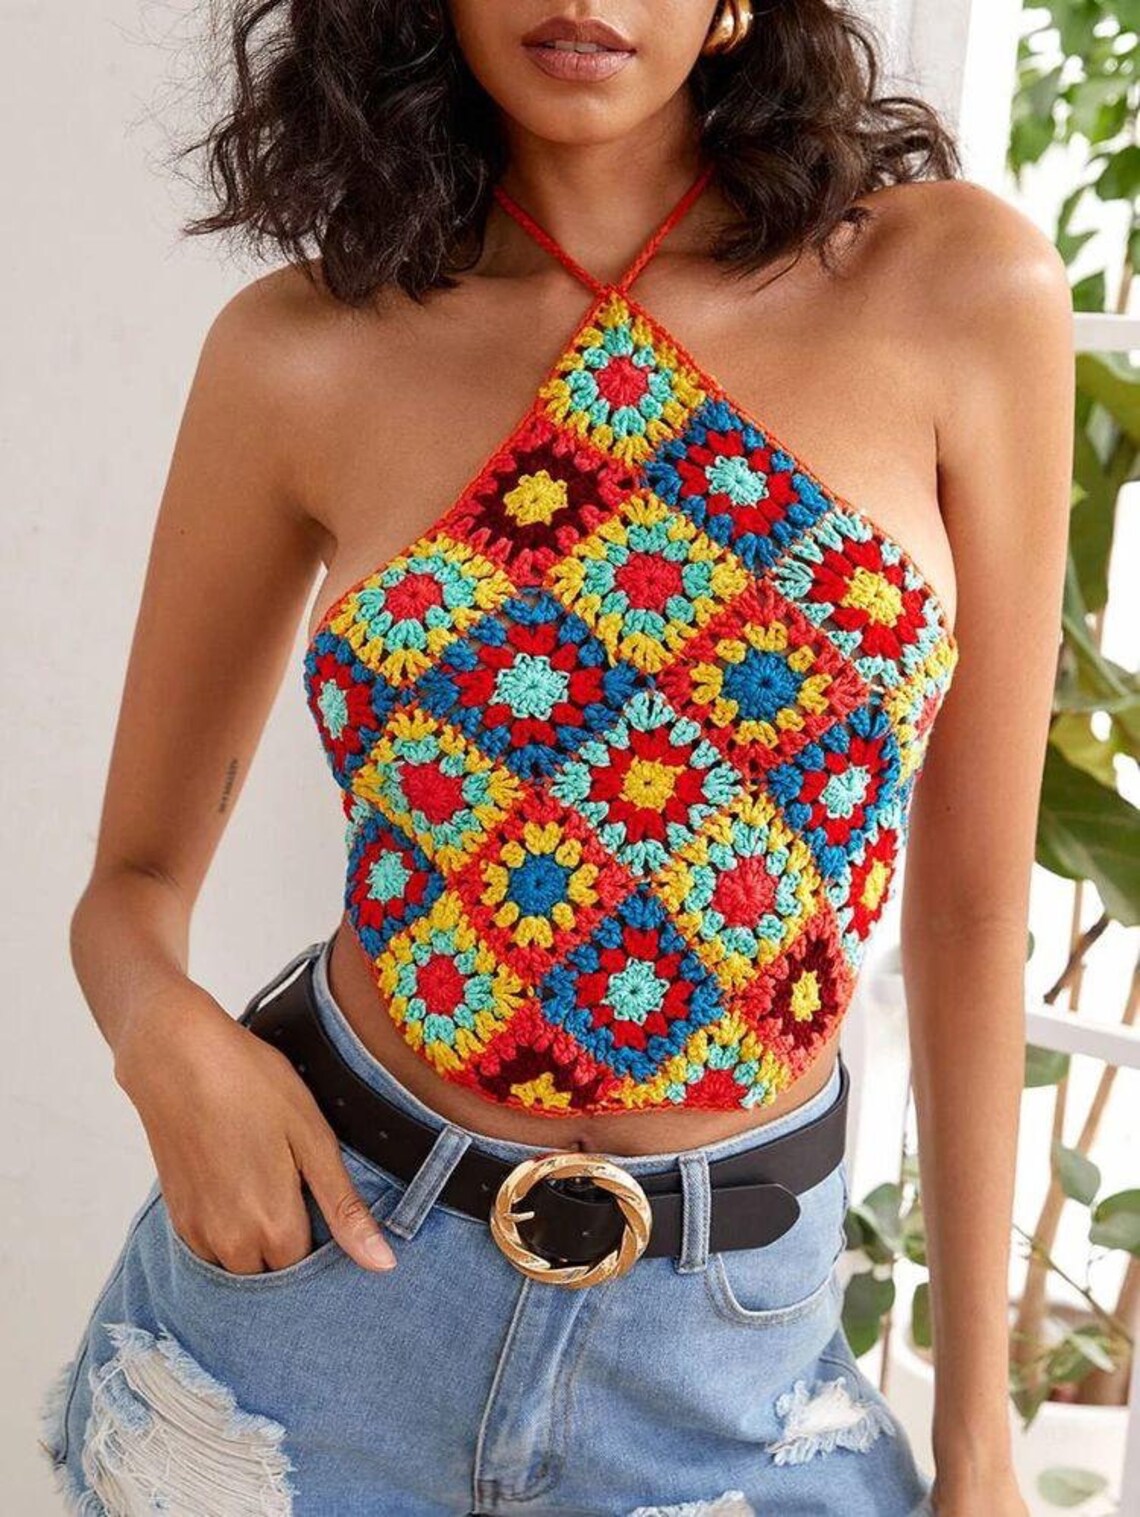 Boho Crop for Woman Granny Square Blouse Crochet Top - Etsy